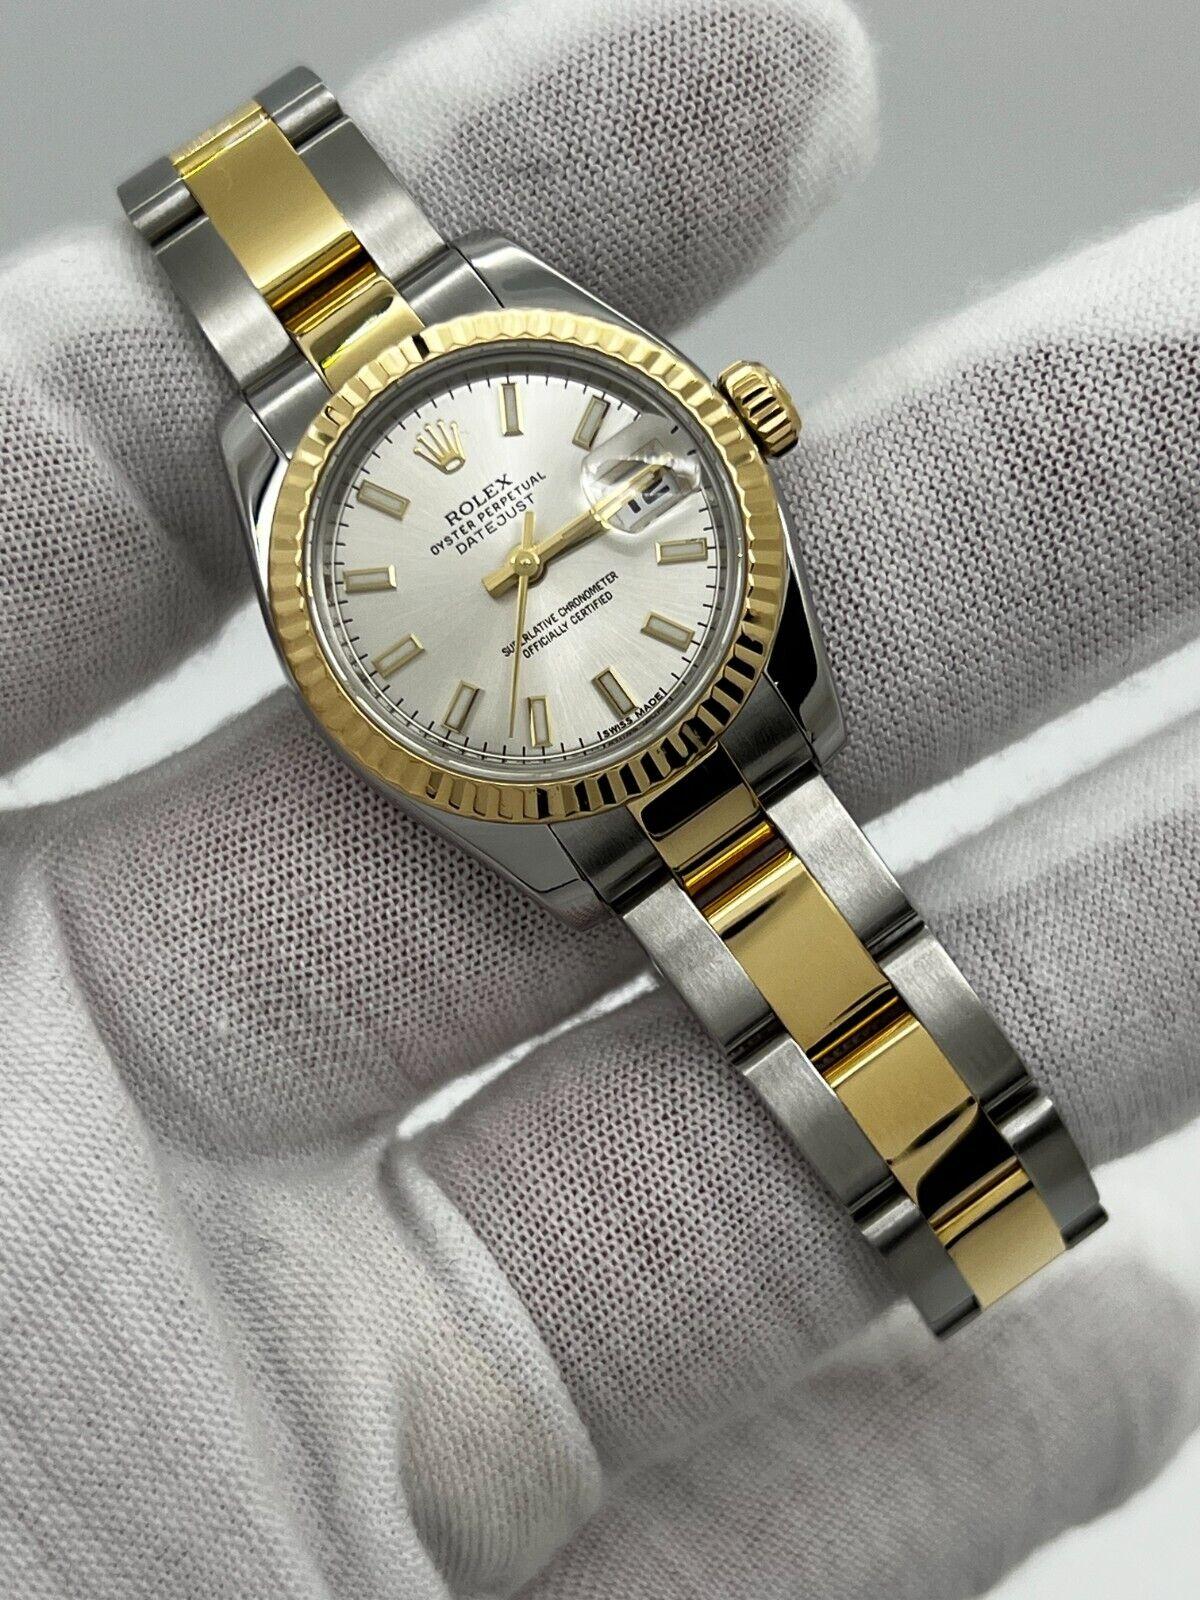 Style Number: 179173

Serial: 3335V***

Year: 2015
 
Model: Ladies Datejust 
 
Case Material: Stainless Steel 
 
Band: 18K Yellow Gold & Stainless Steel
 
Bezel: 18K Yellow Gold 
 
Dial: Silver Dial 
 
Face: Sapphire Crystal 
 
Case Size: 26mm 
